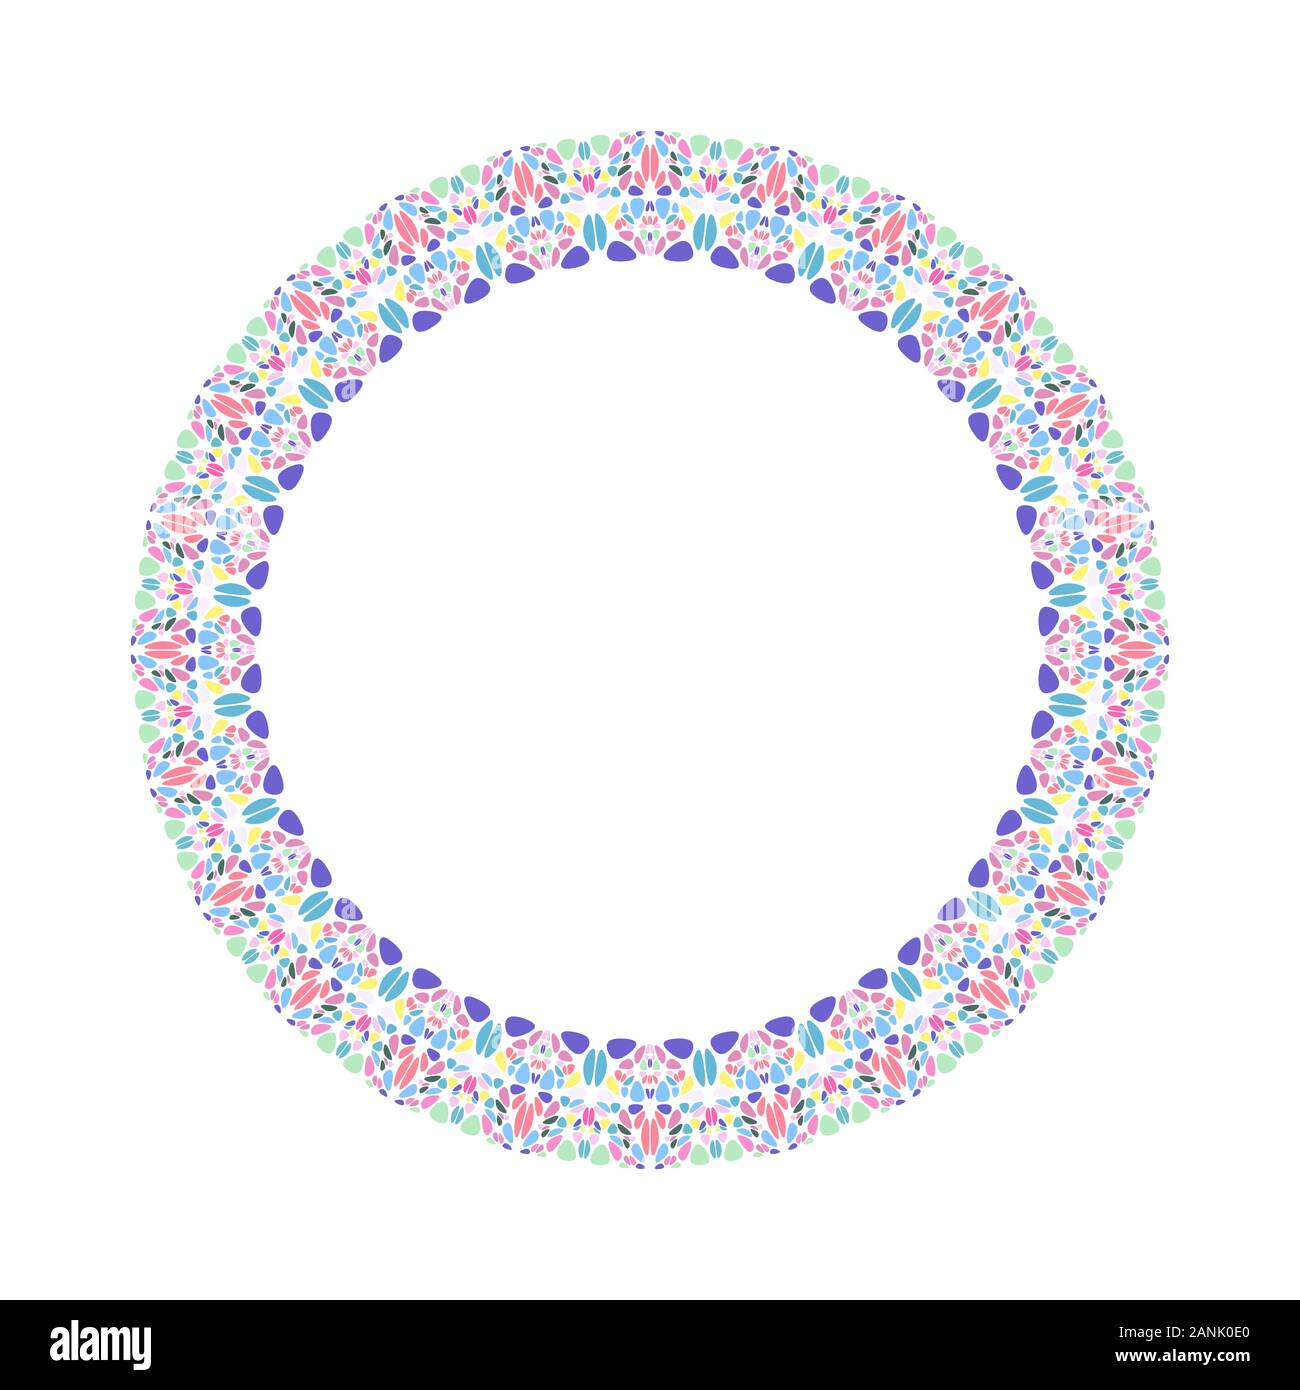 Abstract geometrical floral circle - circular vector design element on white background Stock Vector